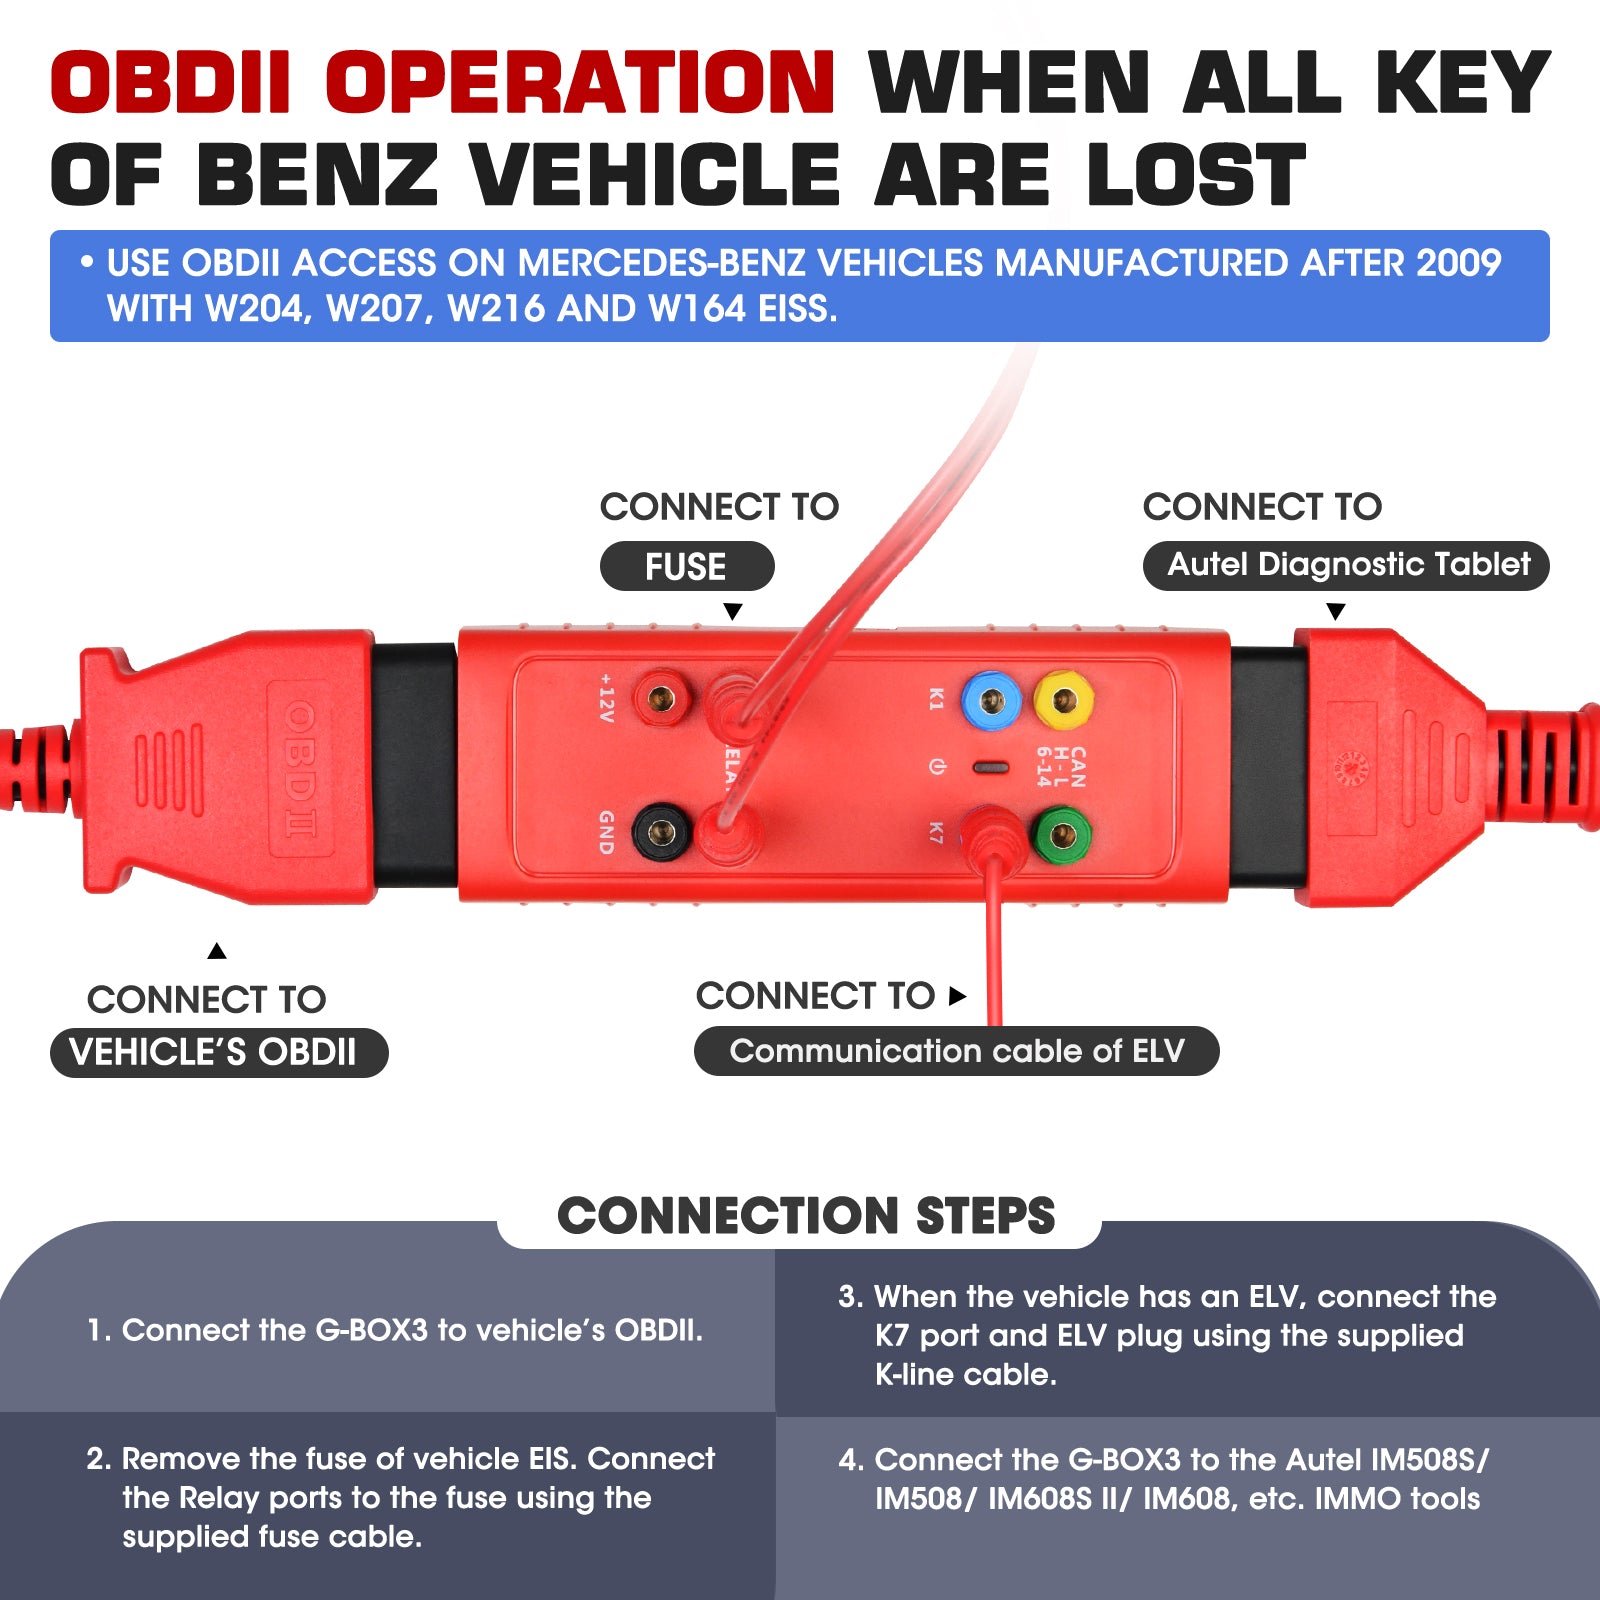 OBDII Operation When All Key of Benz Vehicle Are Lost